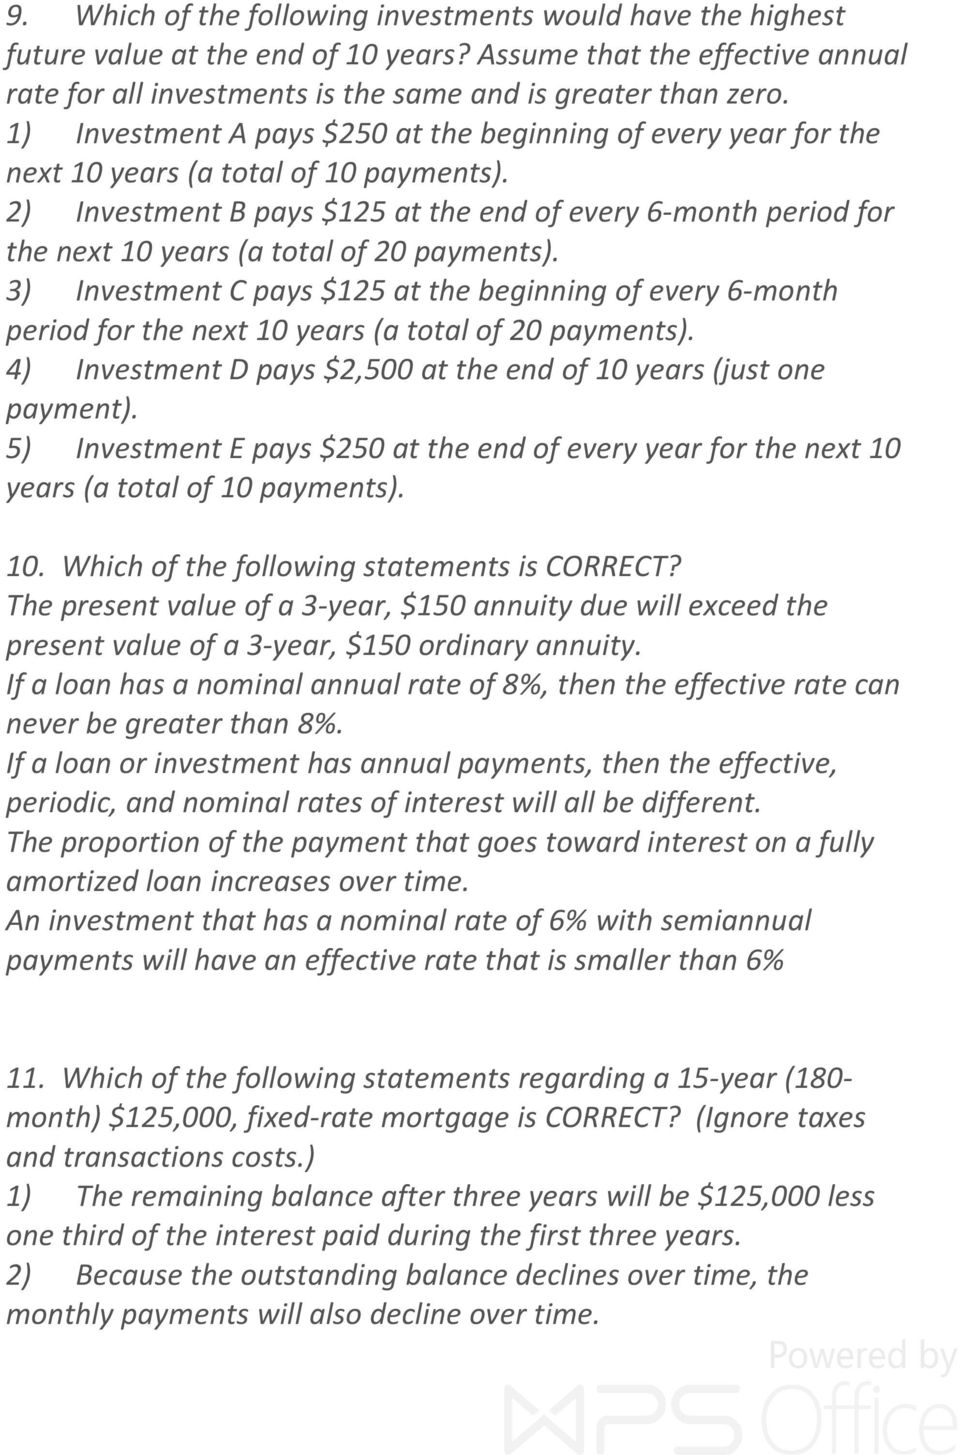 2) Investment B pays $125 at the end of every 6-month period for the next 10 years (a total of 20 payments).